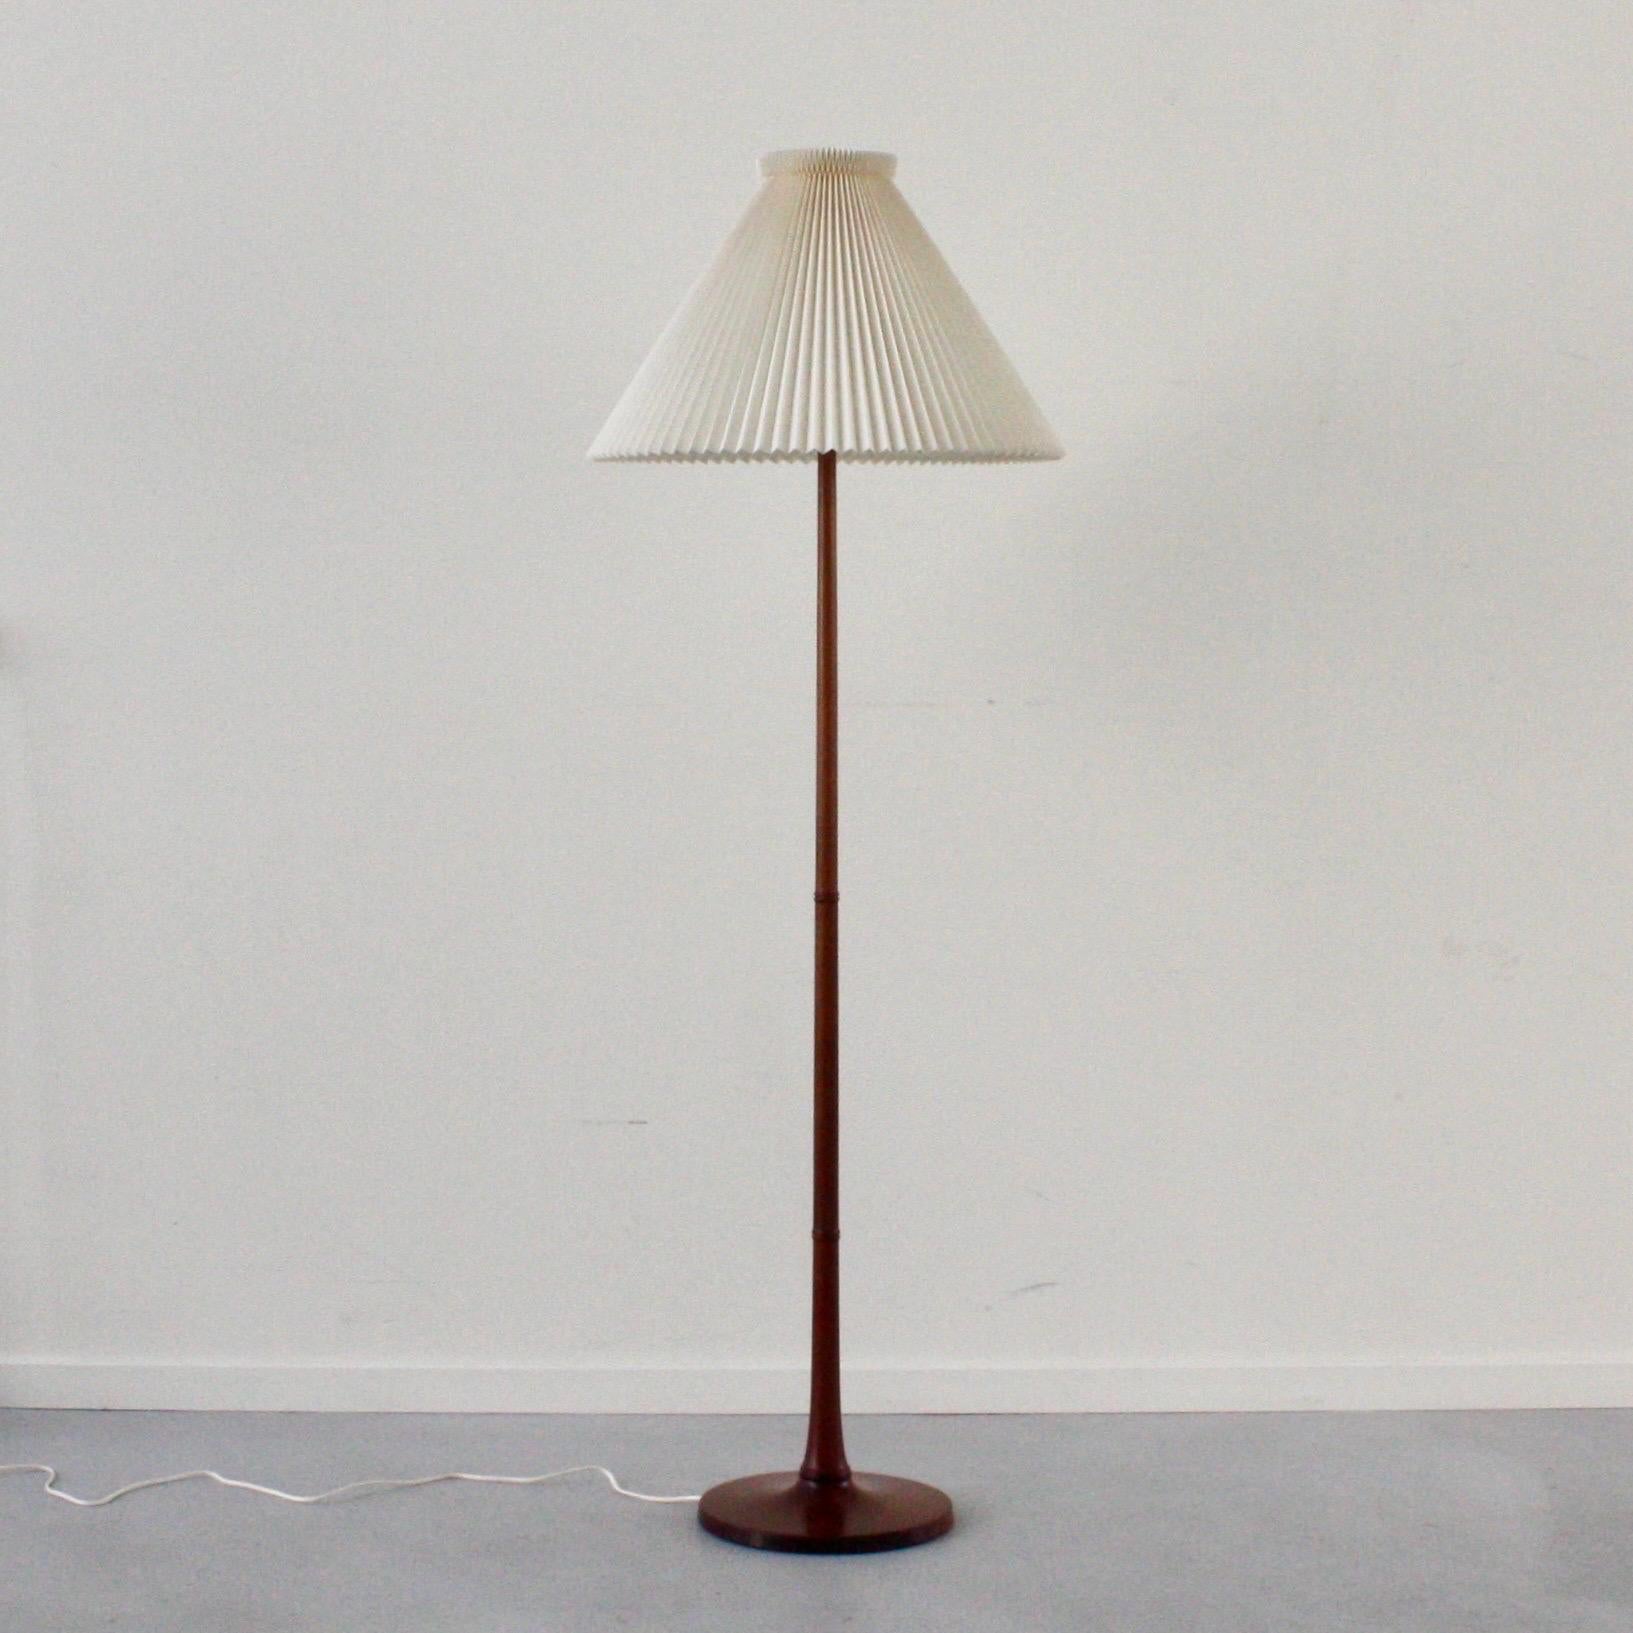 A classic oak wood floor lamp in excellent vintage condition designed by Esben Klint in 1957 for Le Klint. It is rare early version from the late 1950s with the darkened oak wood reflecting back to the designs of the 1930s and 1940s (whereas the